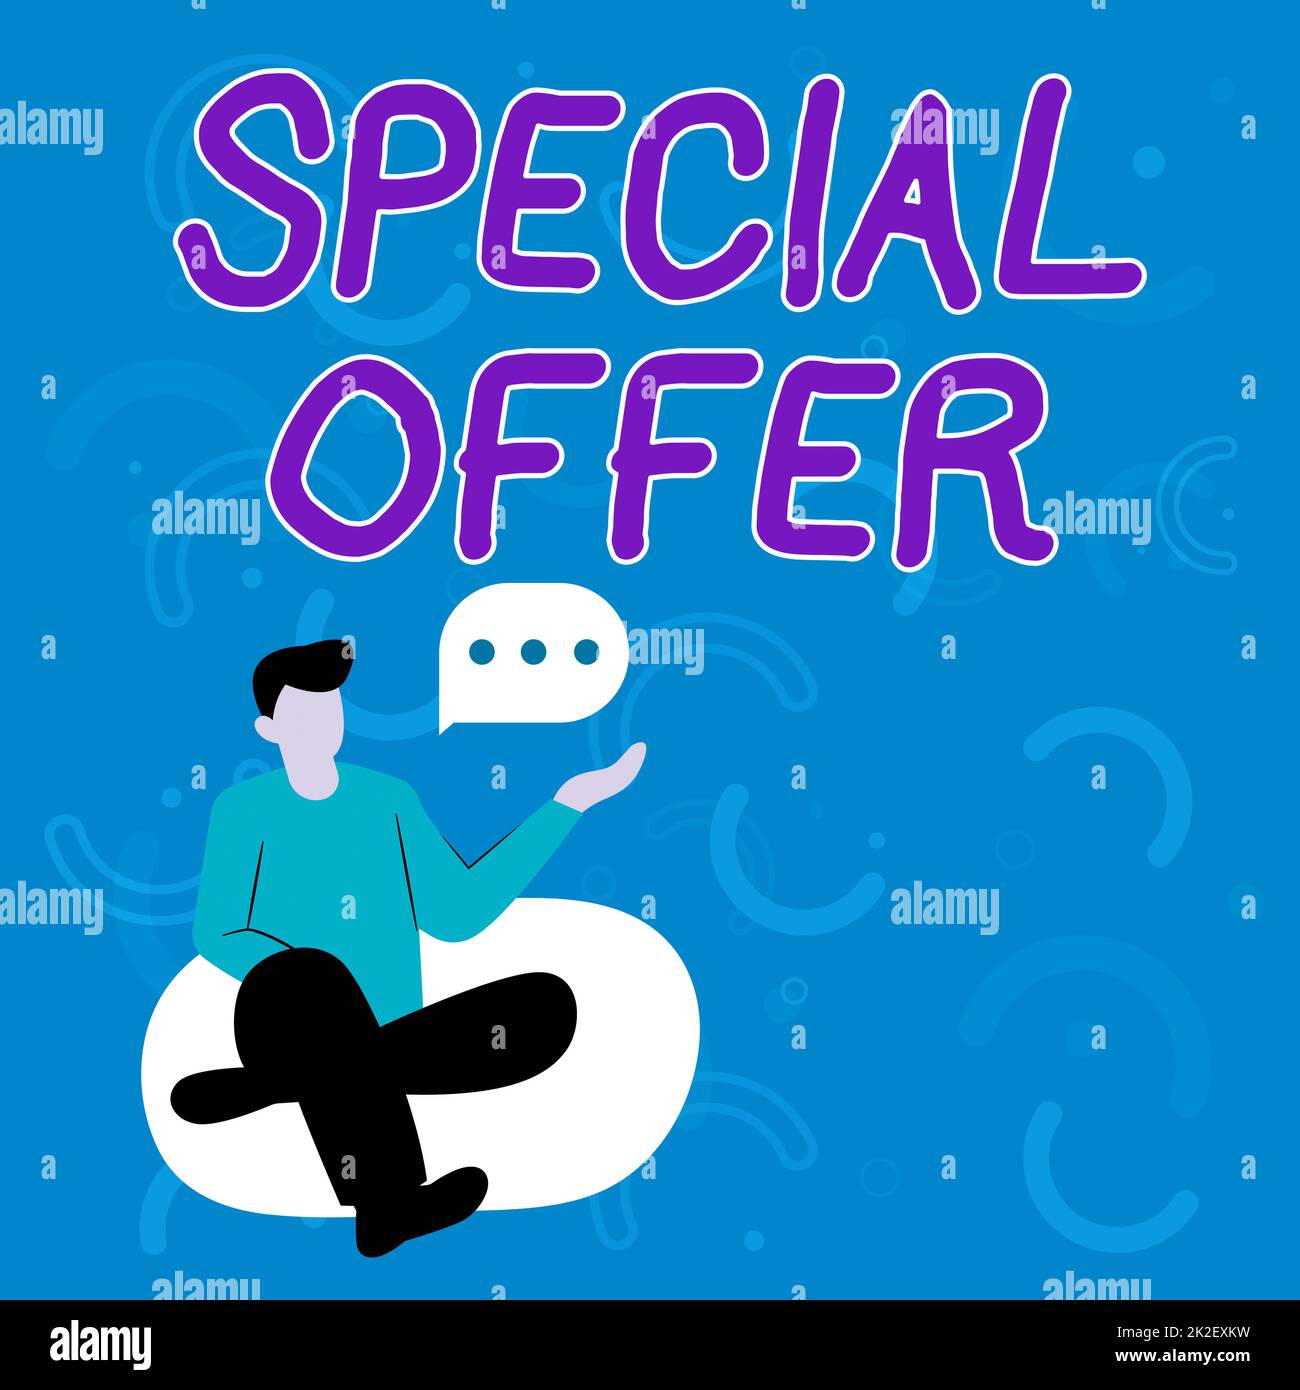 Text caption presenting Special Offer. Concept meaning Selling at a lower or discounted price Bargain with Freebies Illustration Of Businessman Sitting On Soft Sofa Chair Talking. Stock Photo